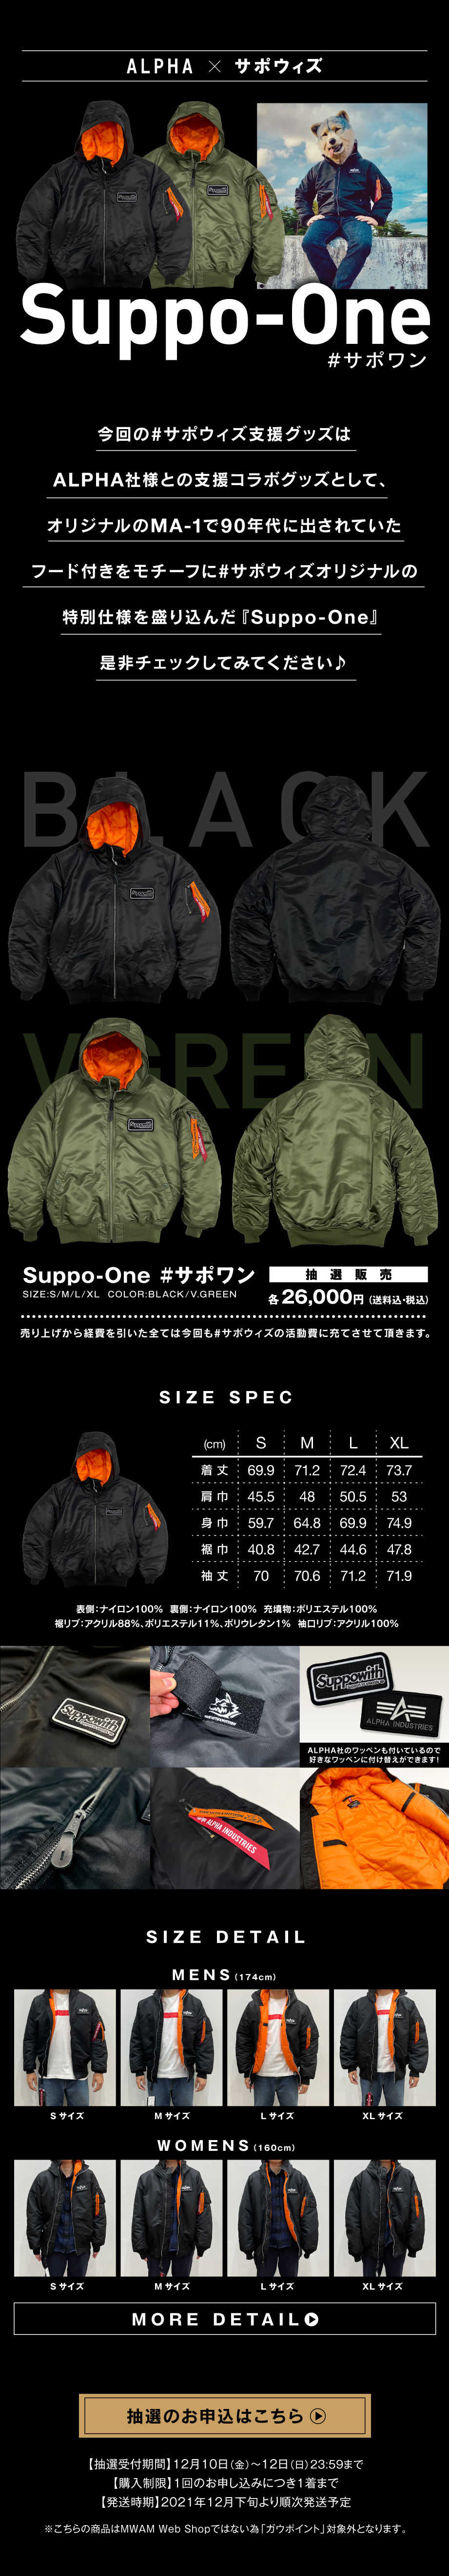 Suppo-One #サポワン | MAN WITH A MISSION